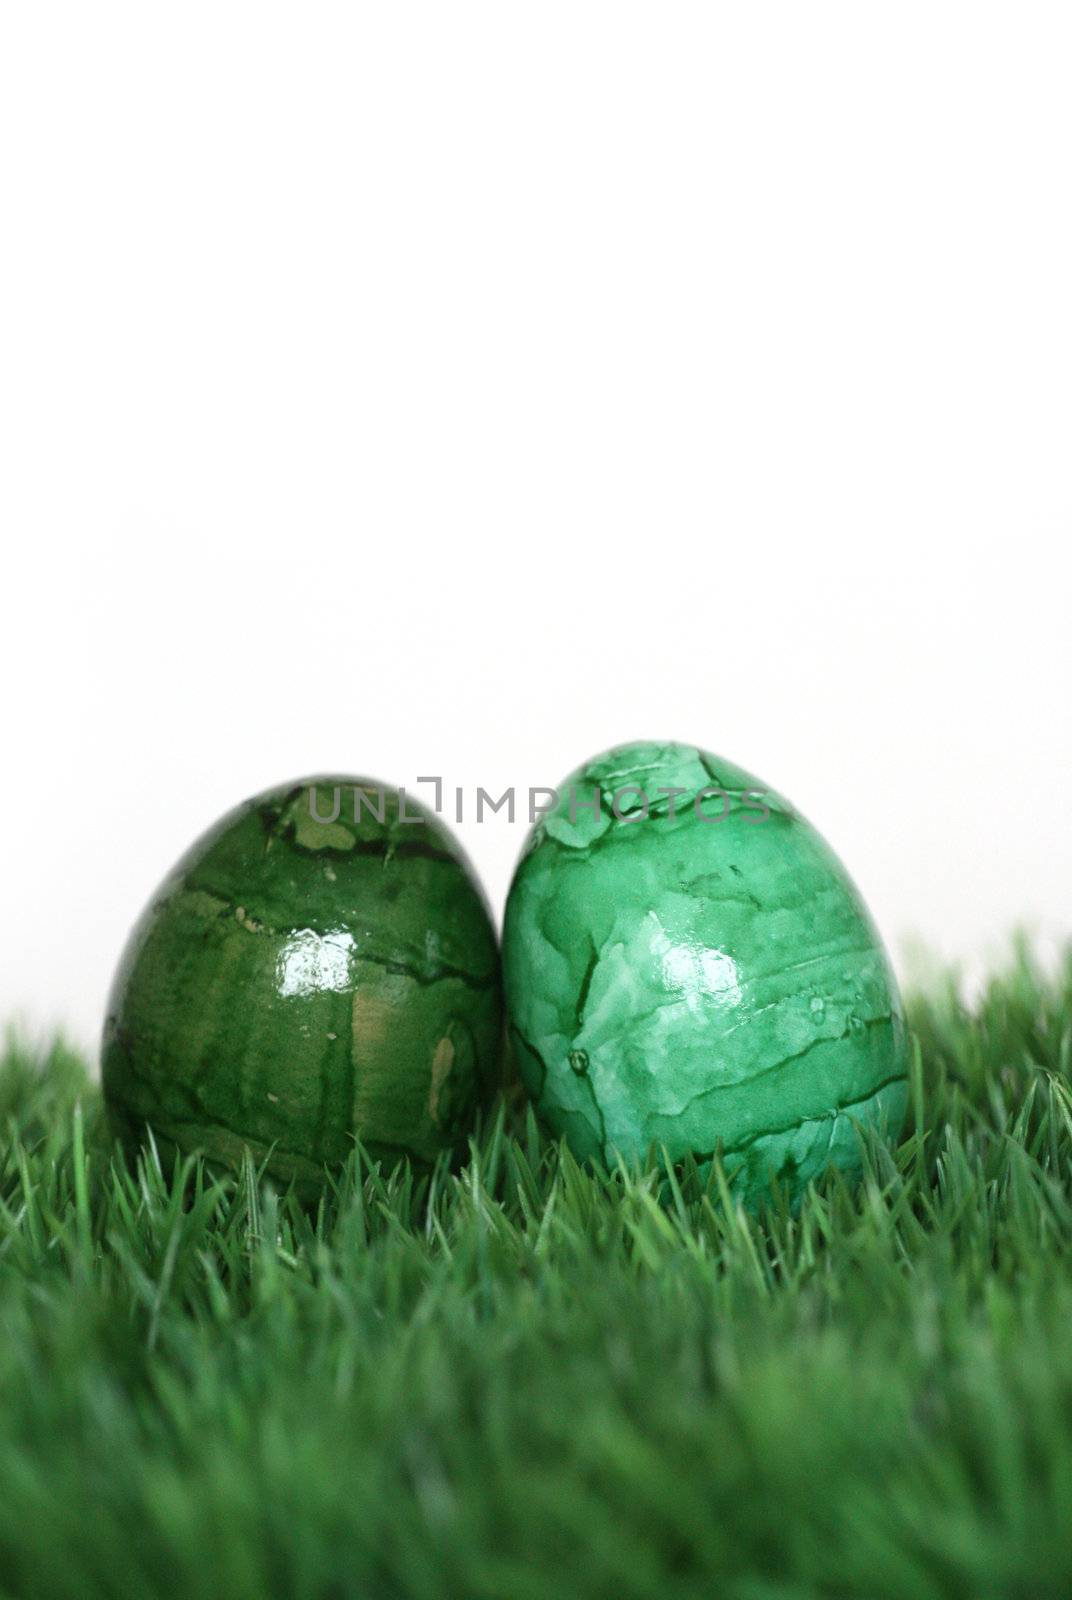 Green and light green eggs by photochecker